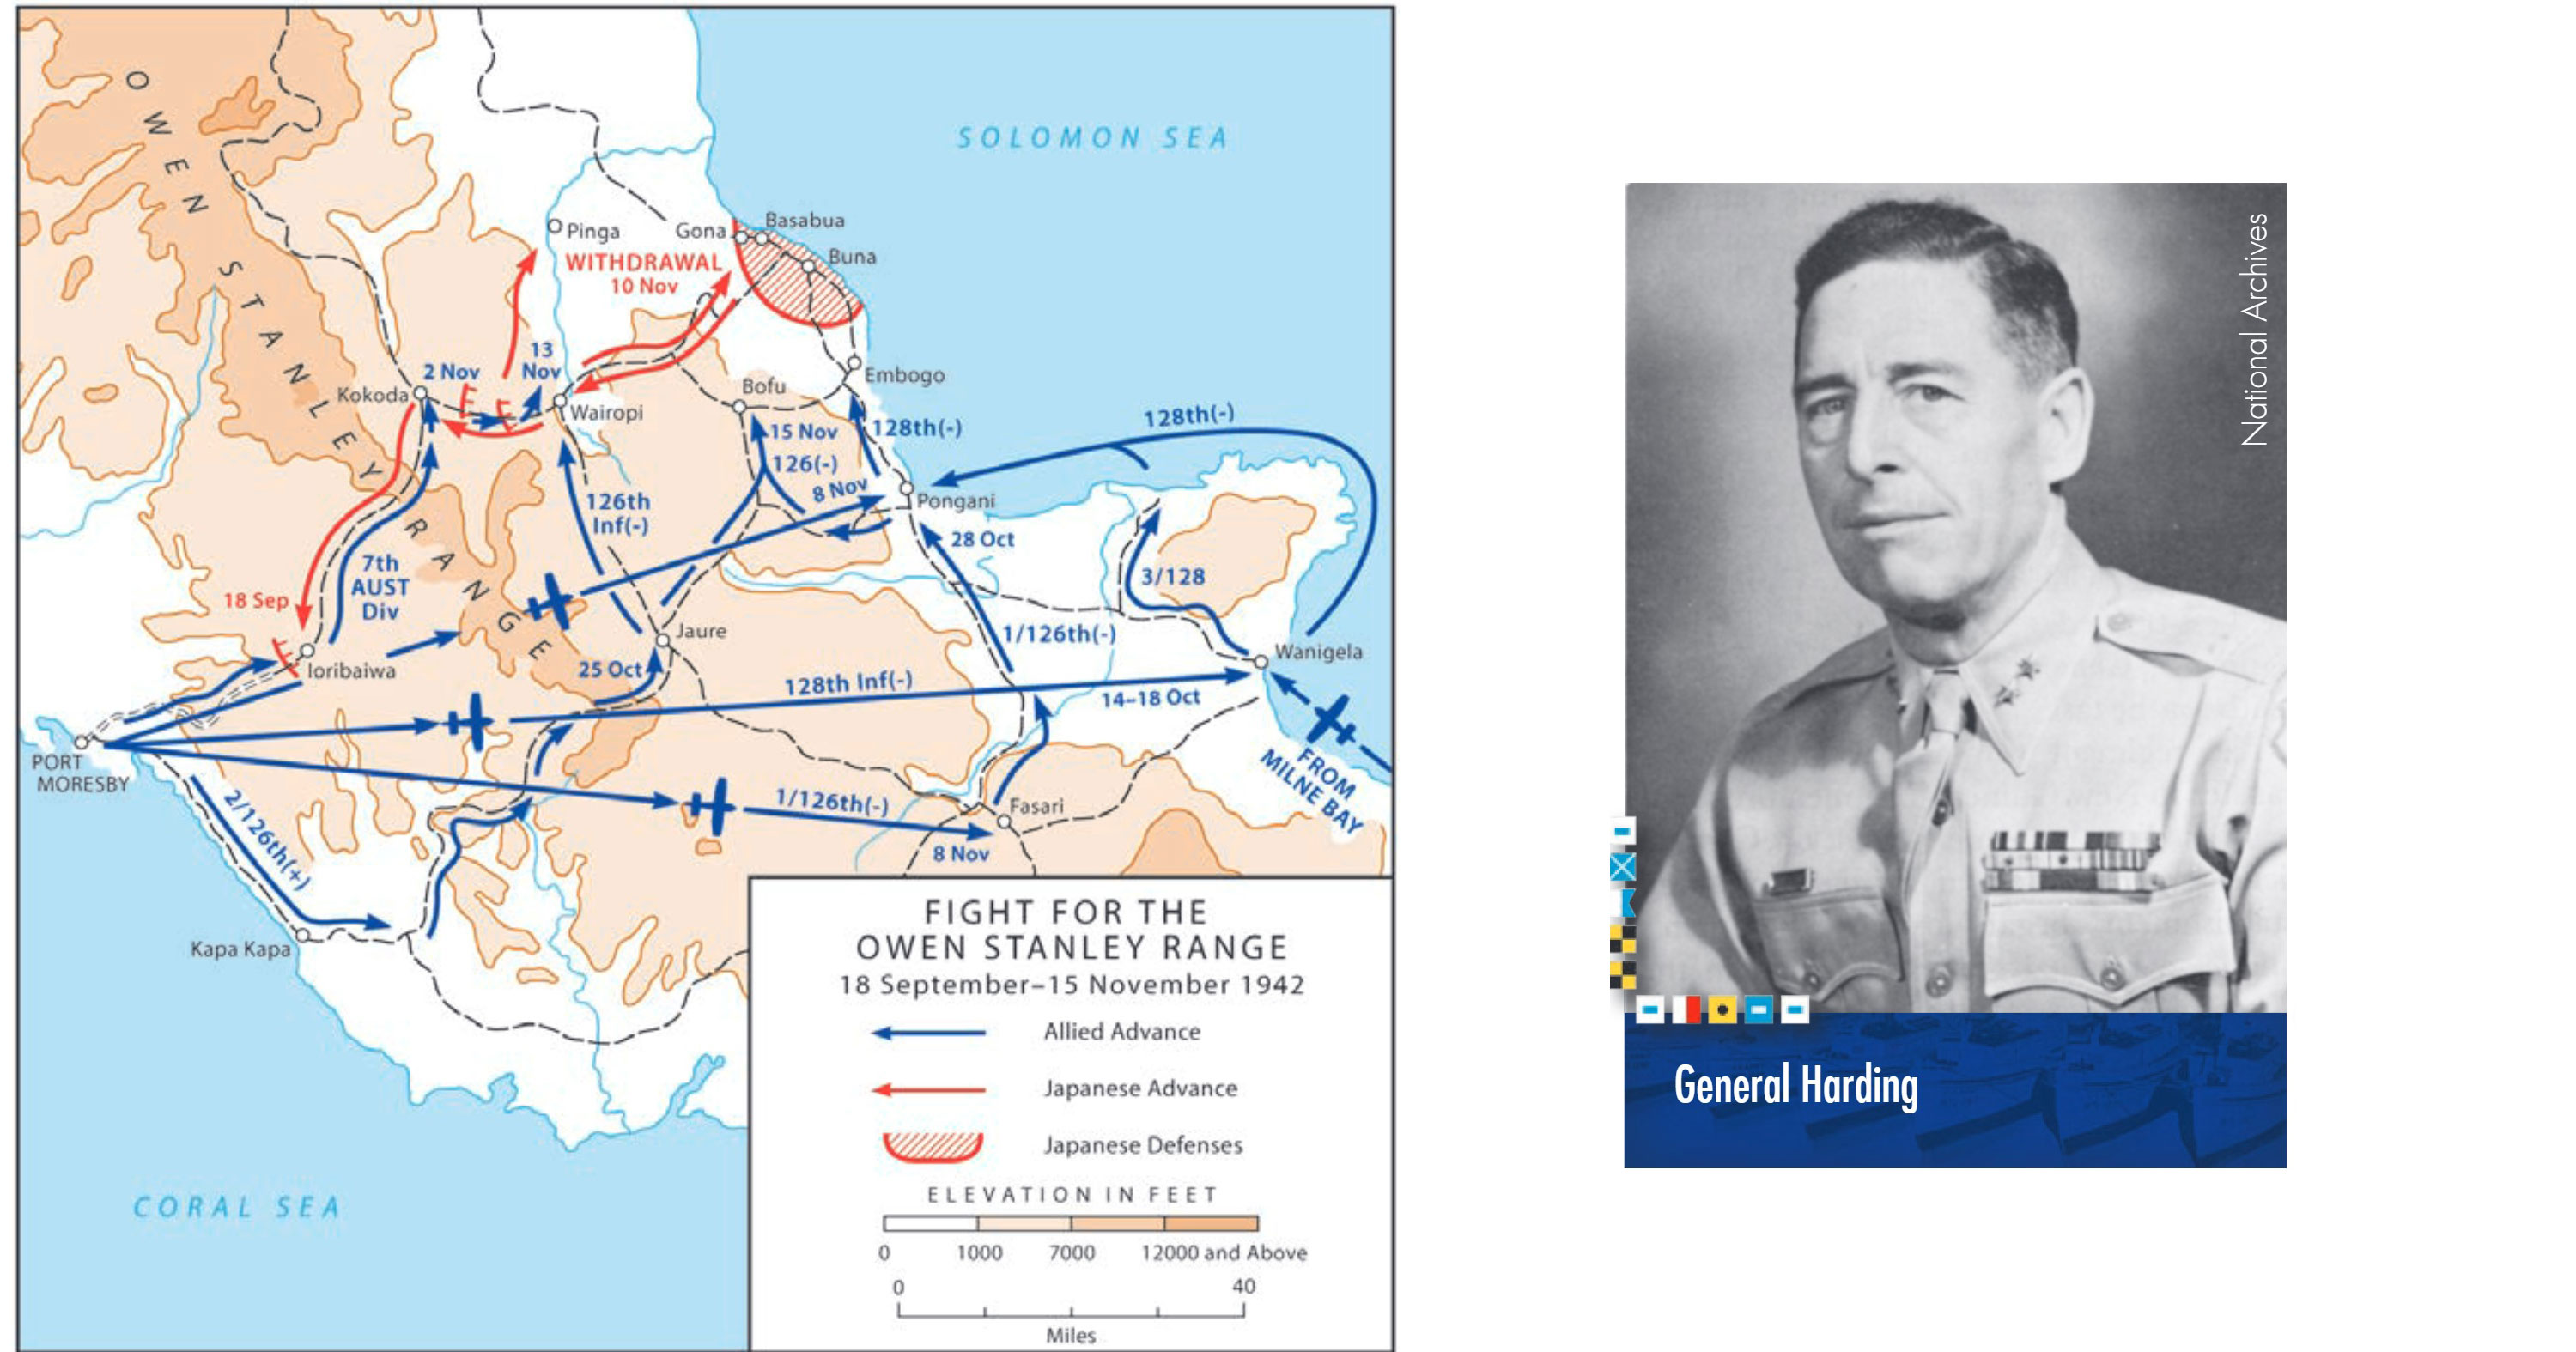 (left) Map of Fight for the Owen Stanely Range (right) General Edwin F. Harding, U.S. A. Photo from National Archives.